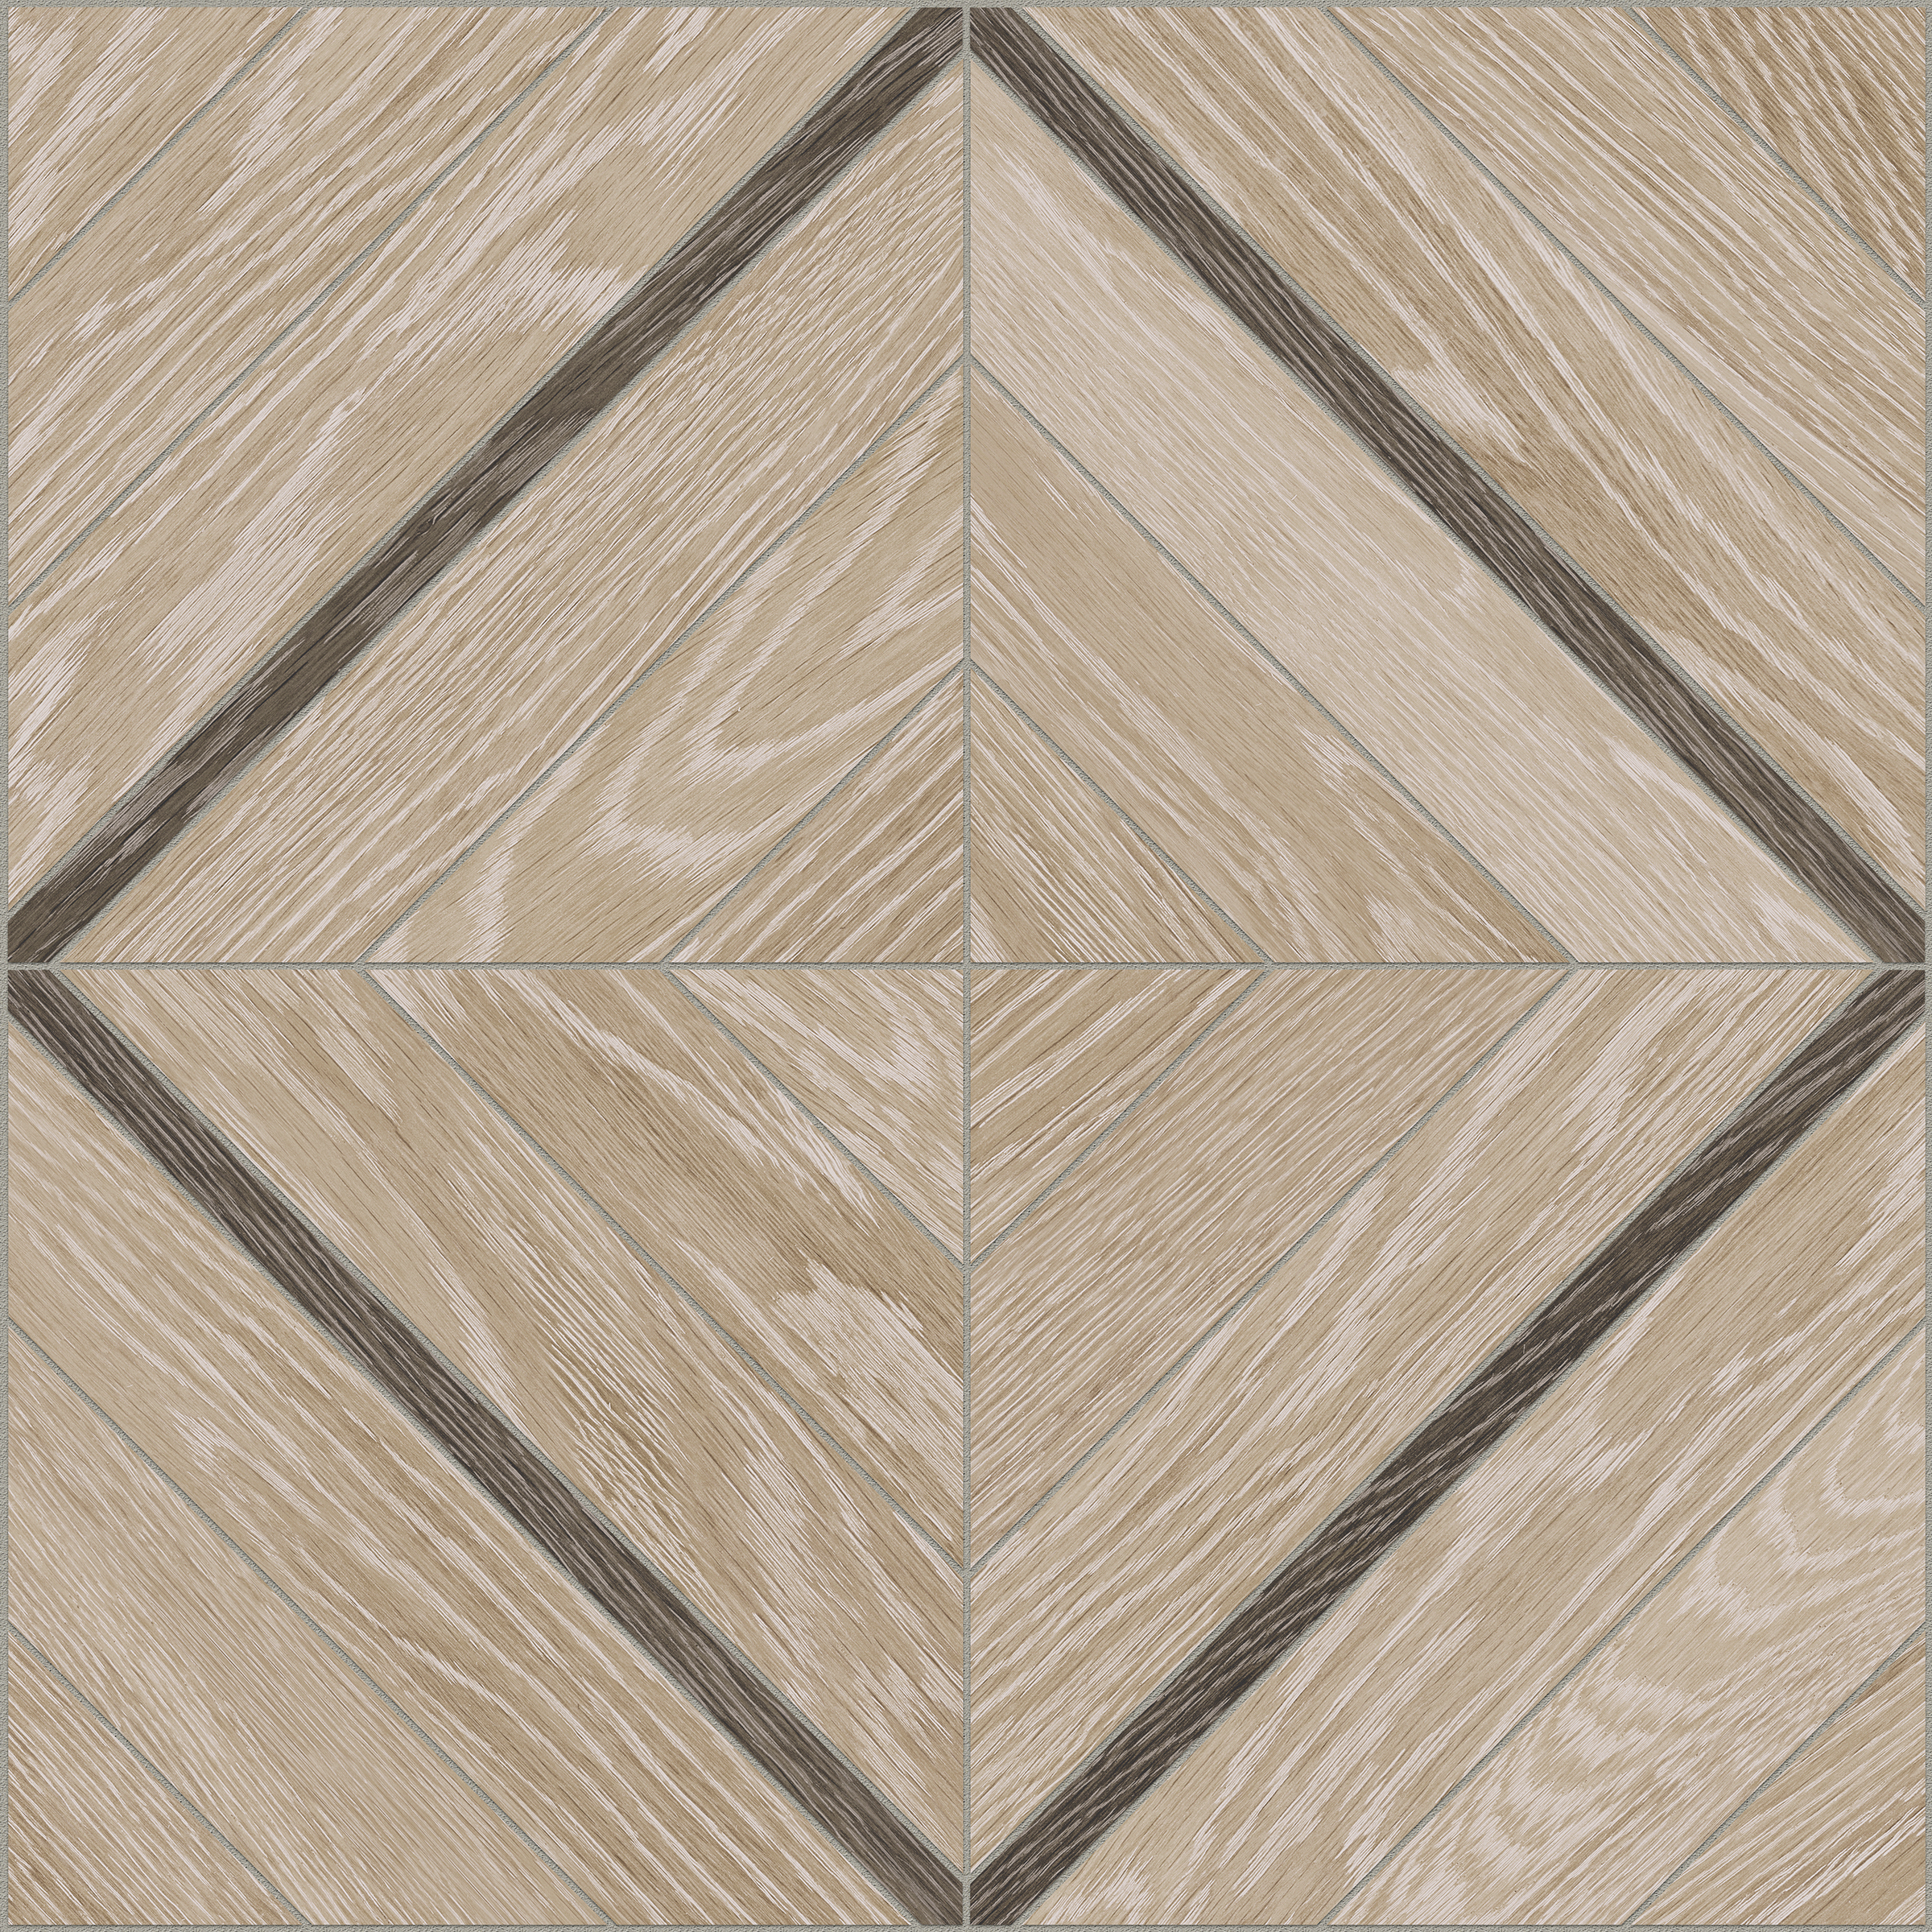 paper birch marquetry pattern glazed porcelain mosaic from aspen anatolia collection distributed by surface group international matte finish straight edge edge mesh shape